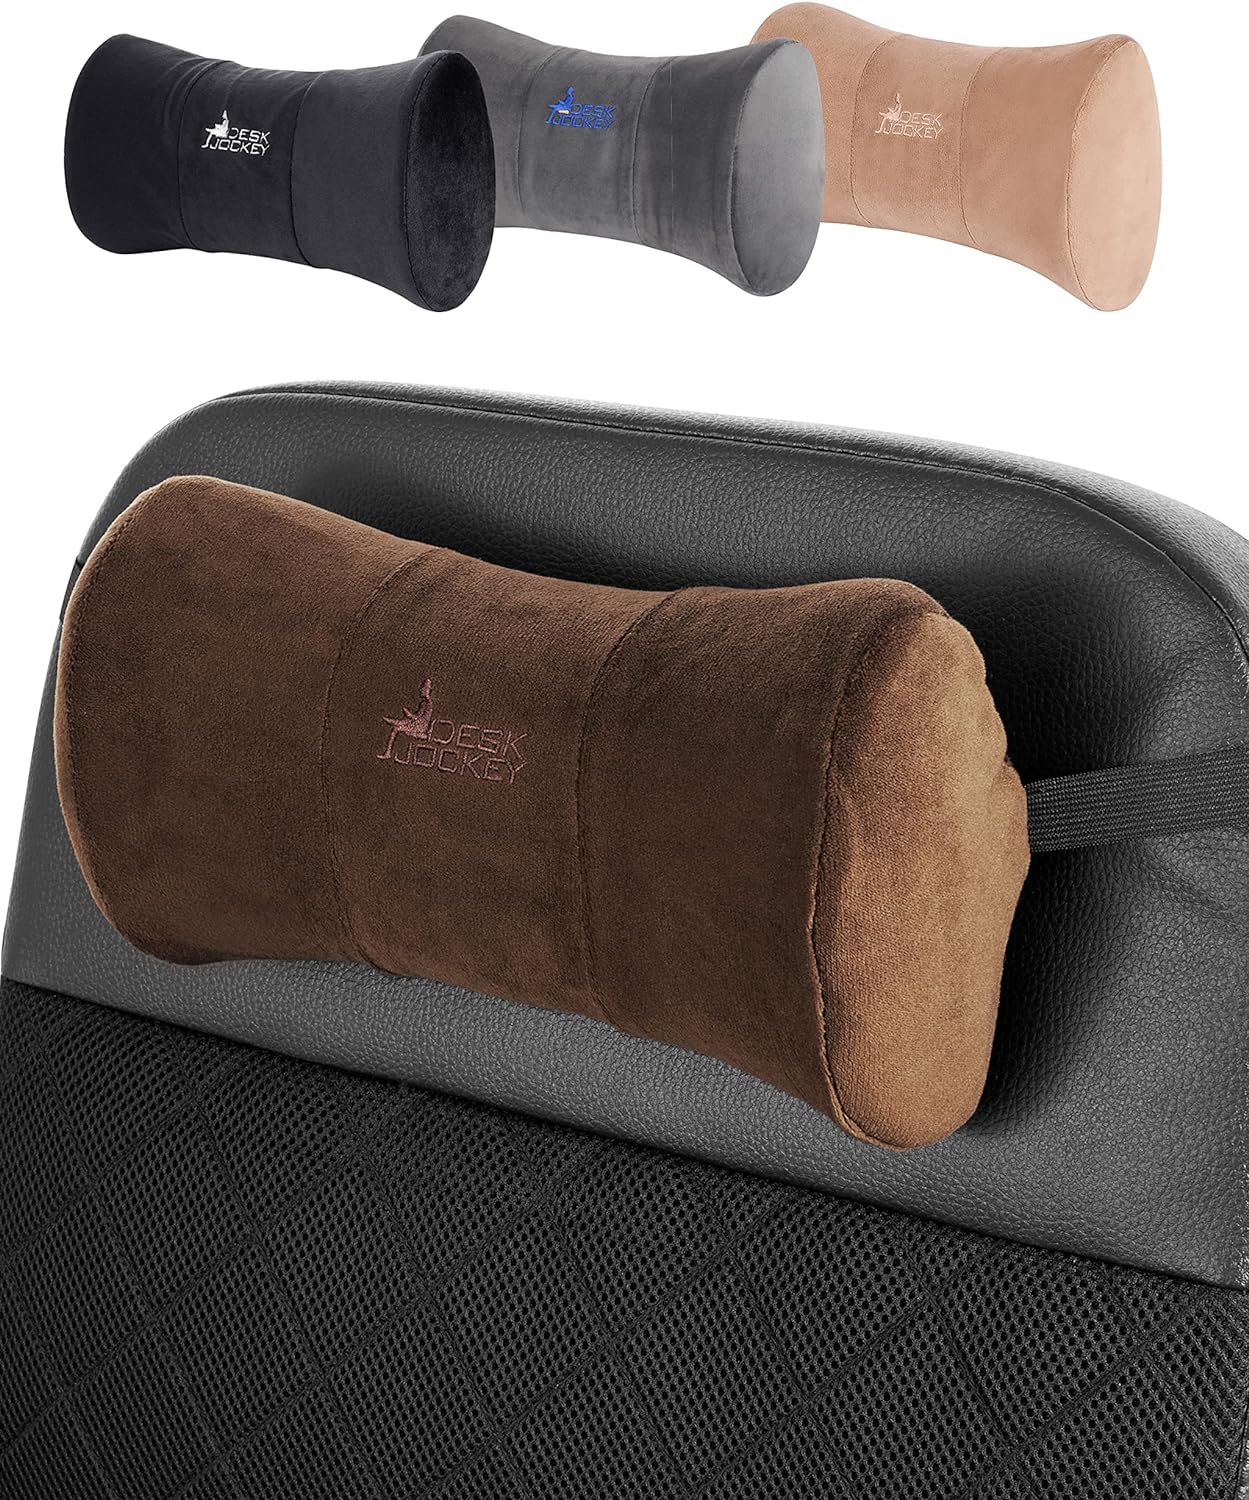 Neck Pillow Headrest Support Cushion - Clinical Grade for Chairs, Recliners, Driving